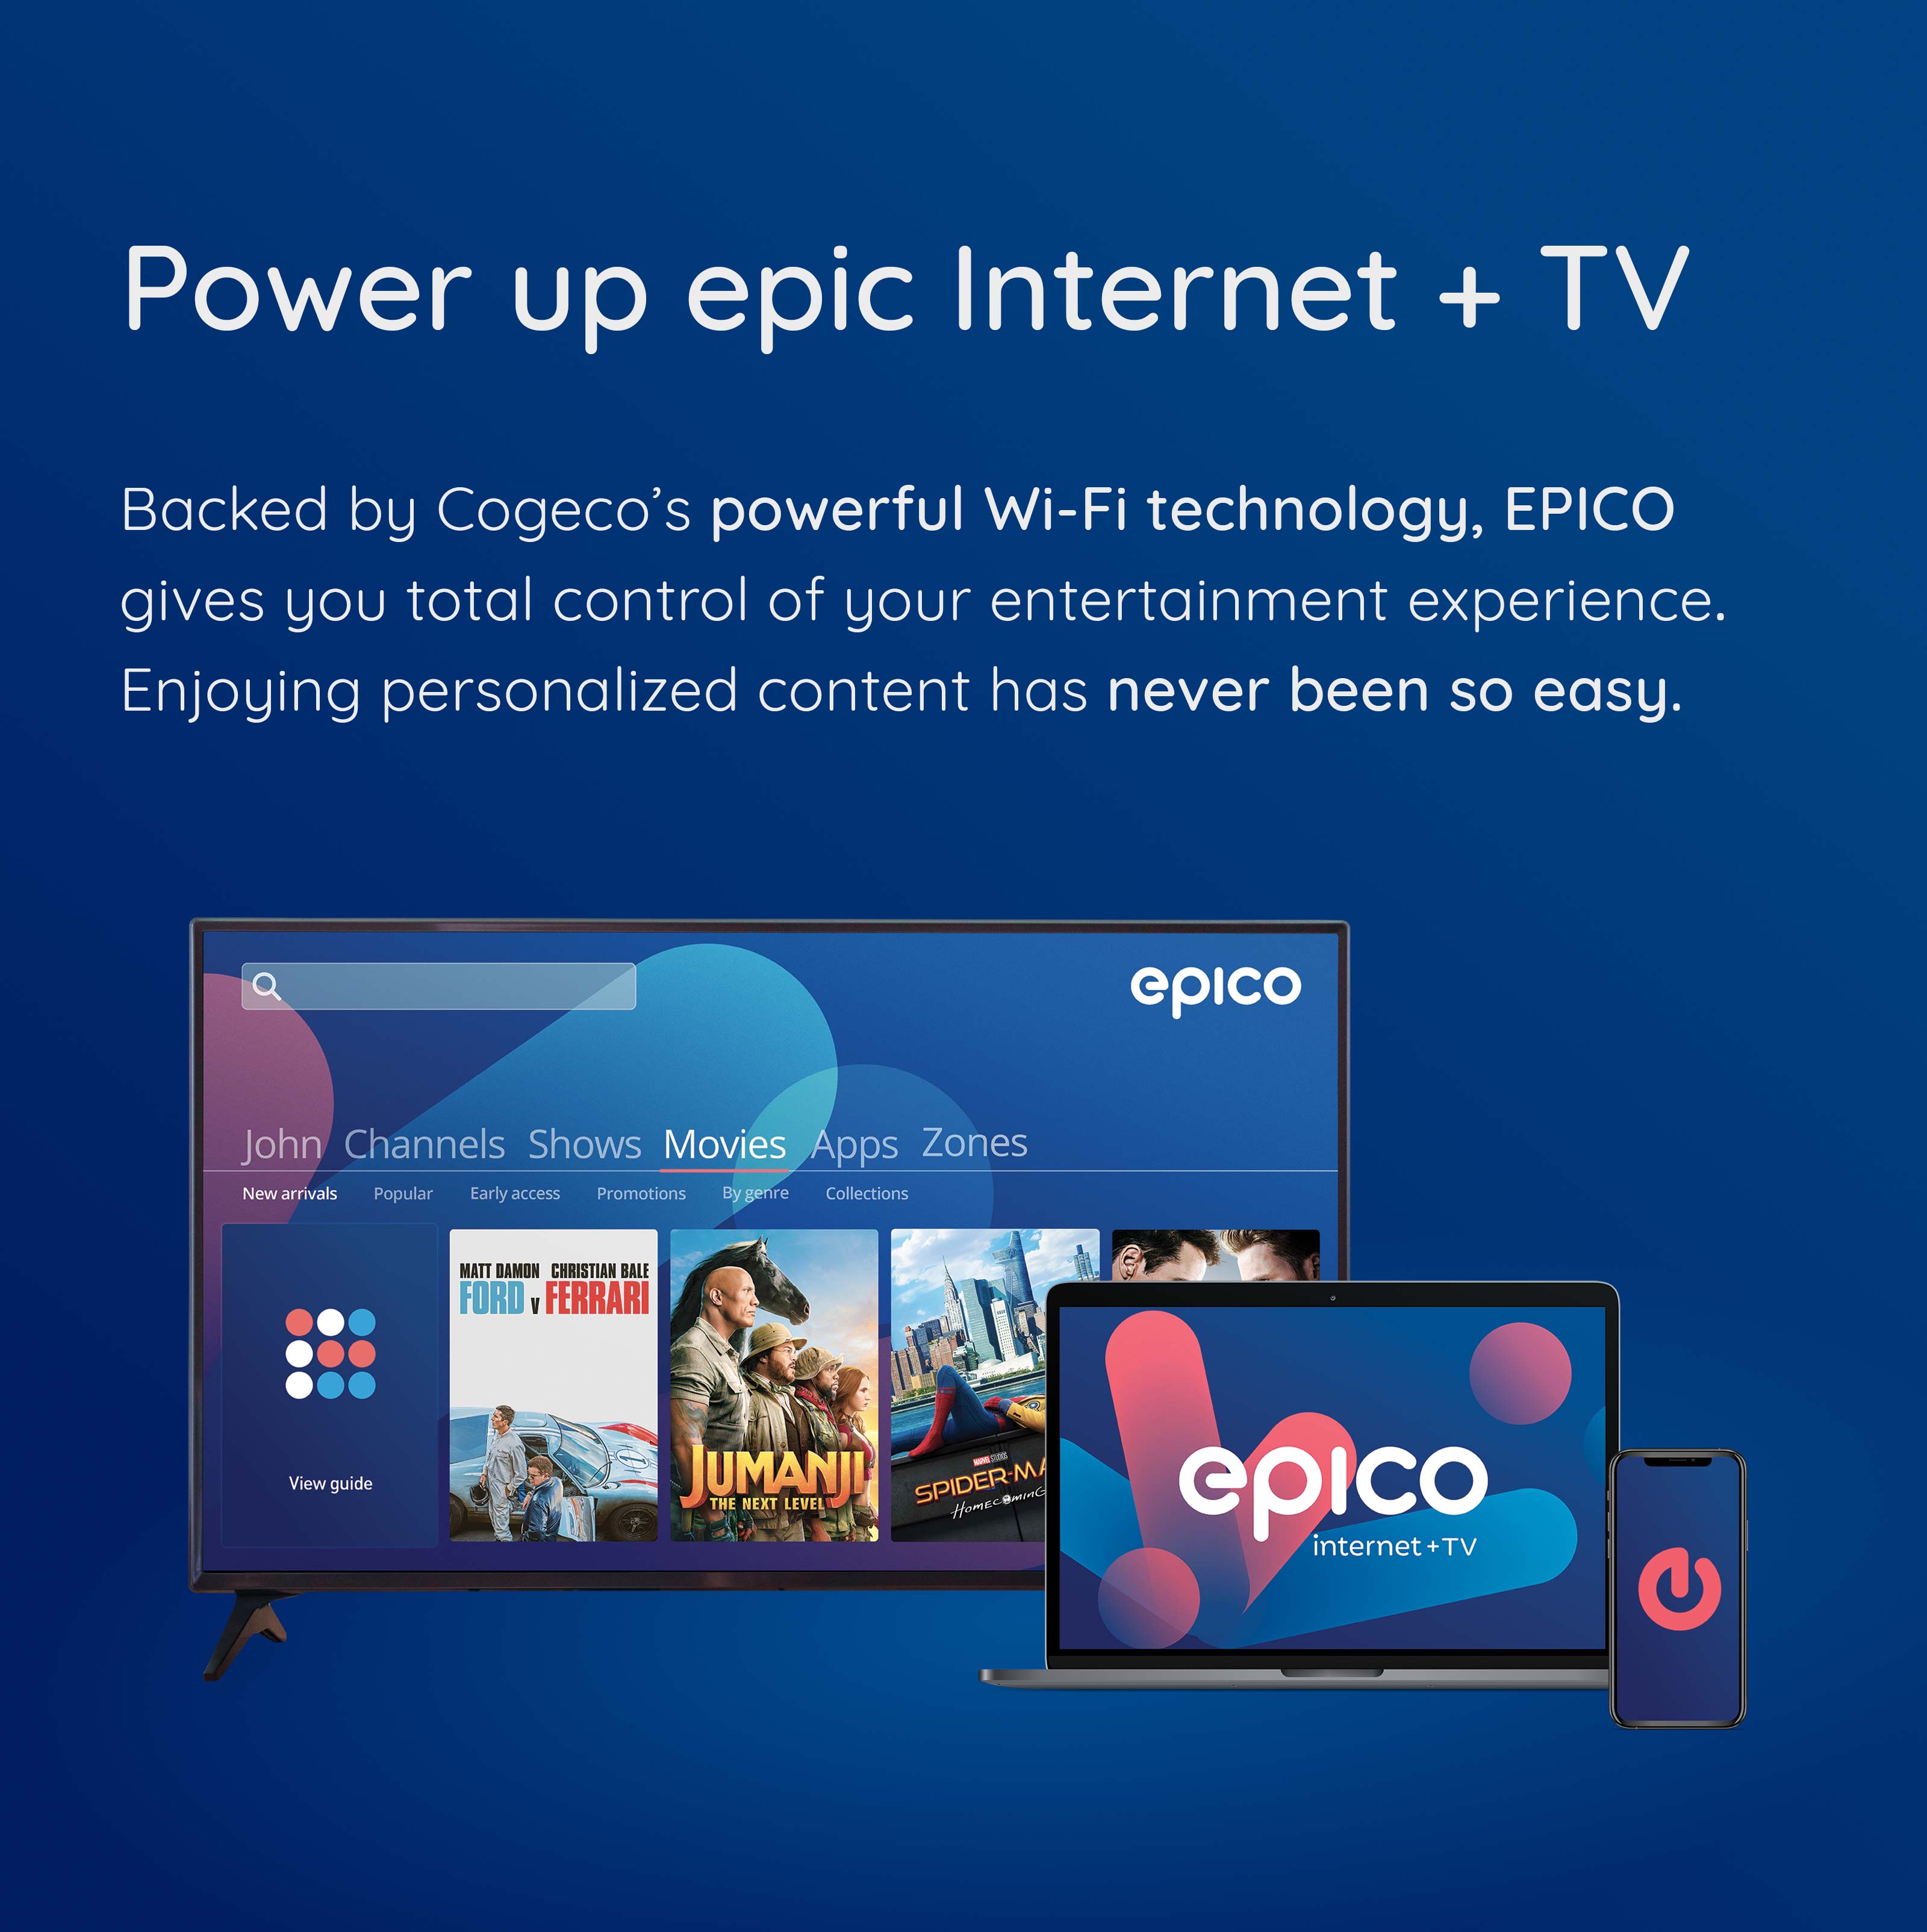 Backed by Cogeco’s powerful Wi-Fi technology, EPICO gives you total control of your entertainment experience. Enjoying personalized content has never been so easy.